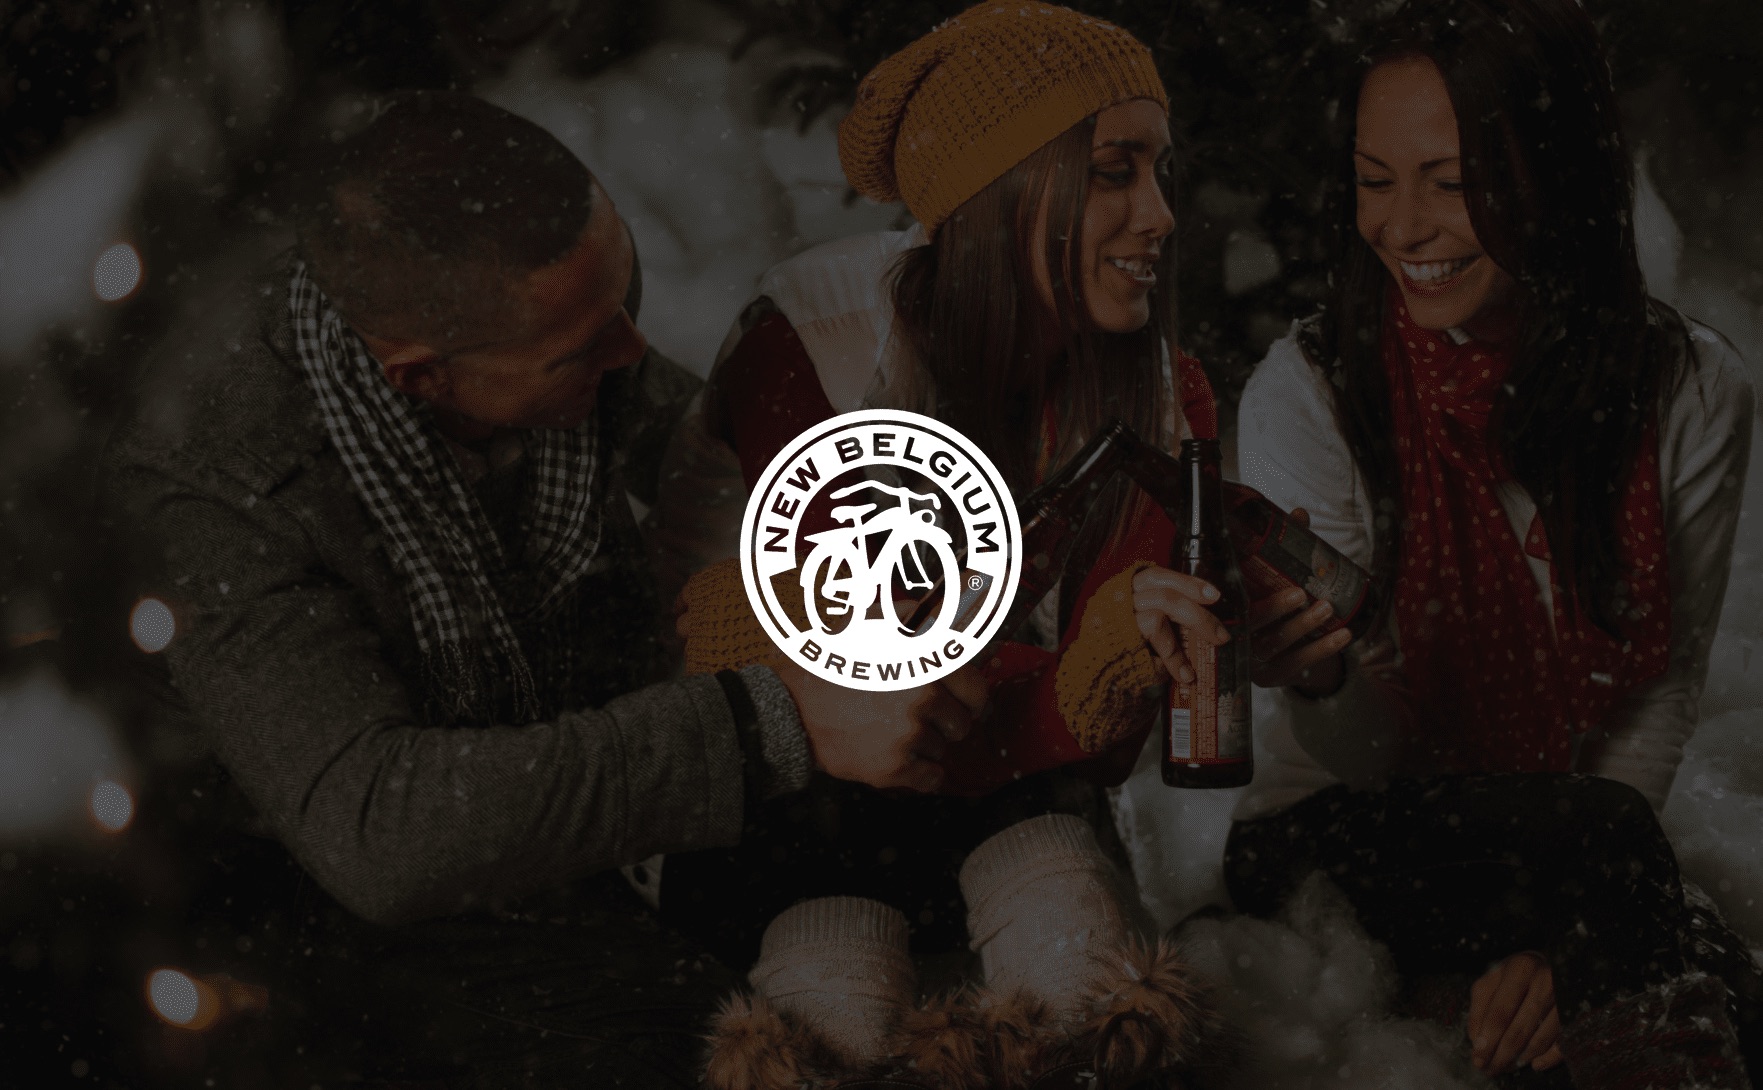 IU C&I Studios Page White New Belgium Brewing logo with man and two women toasting beer bottles in a winter scene in the background